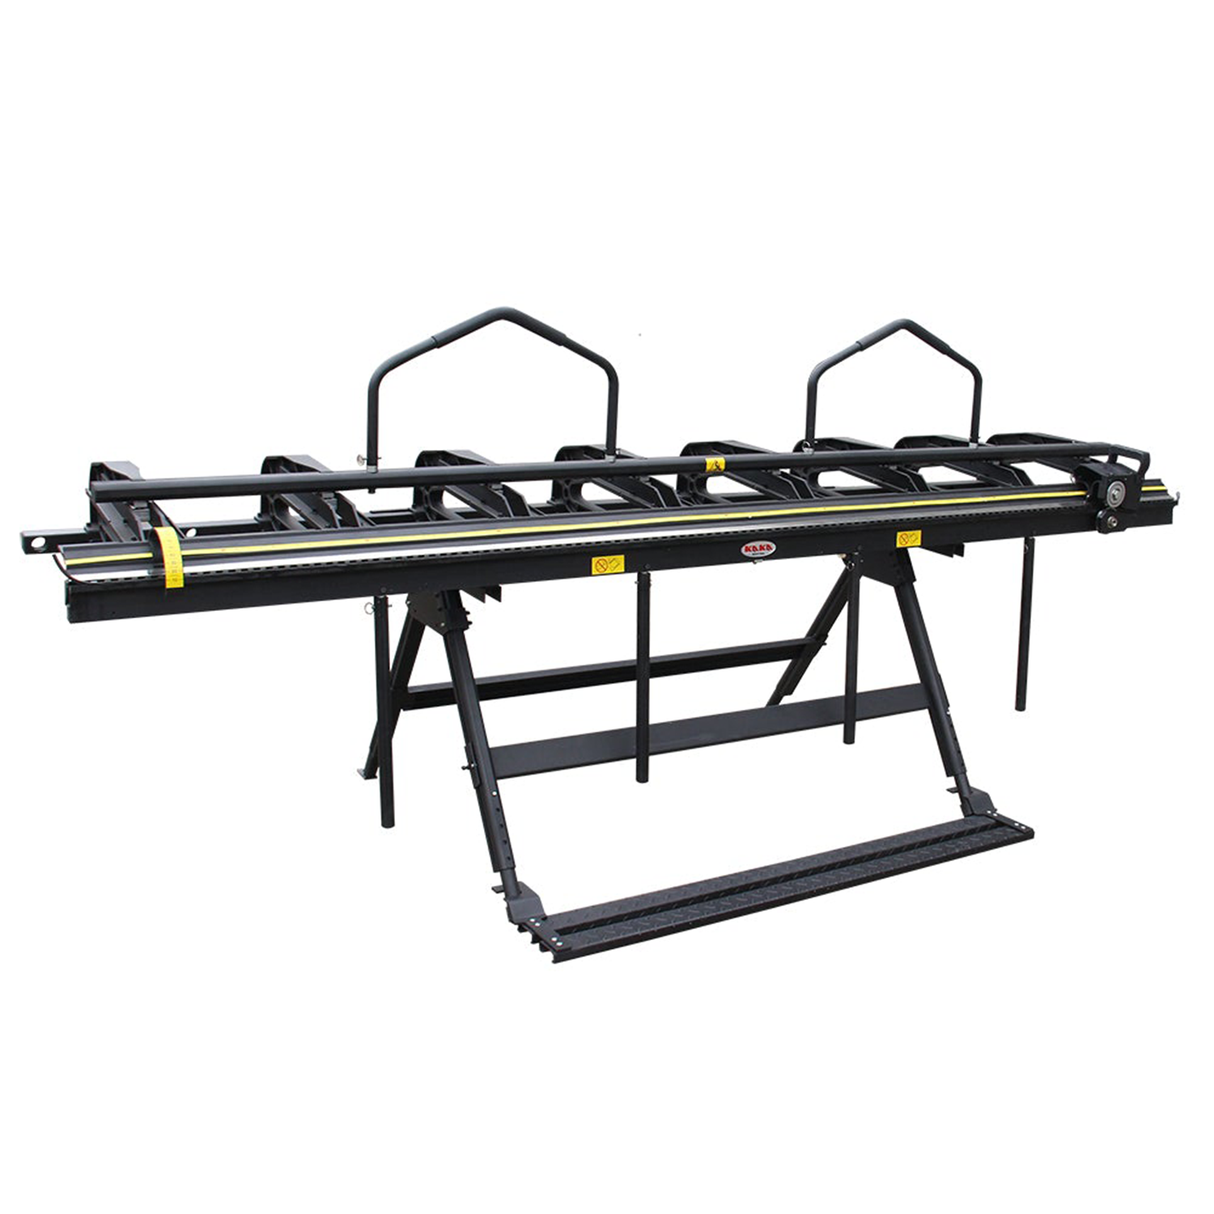 KANG Industrial ALB-126 Portable Thin Plate Bending Brake, 3200mm Width, With a Roller Knife to Cut Sheet